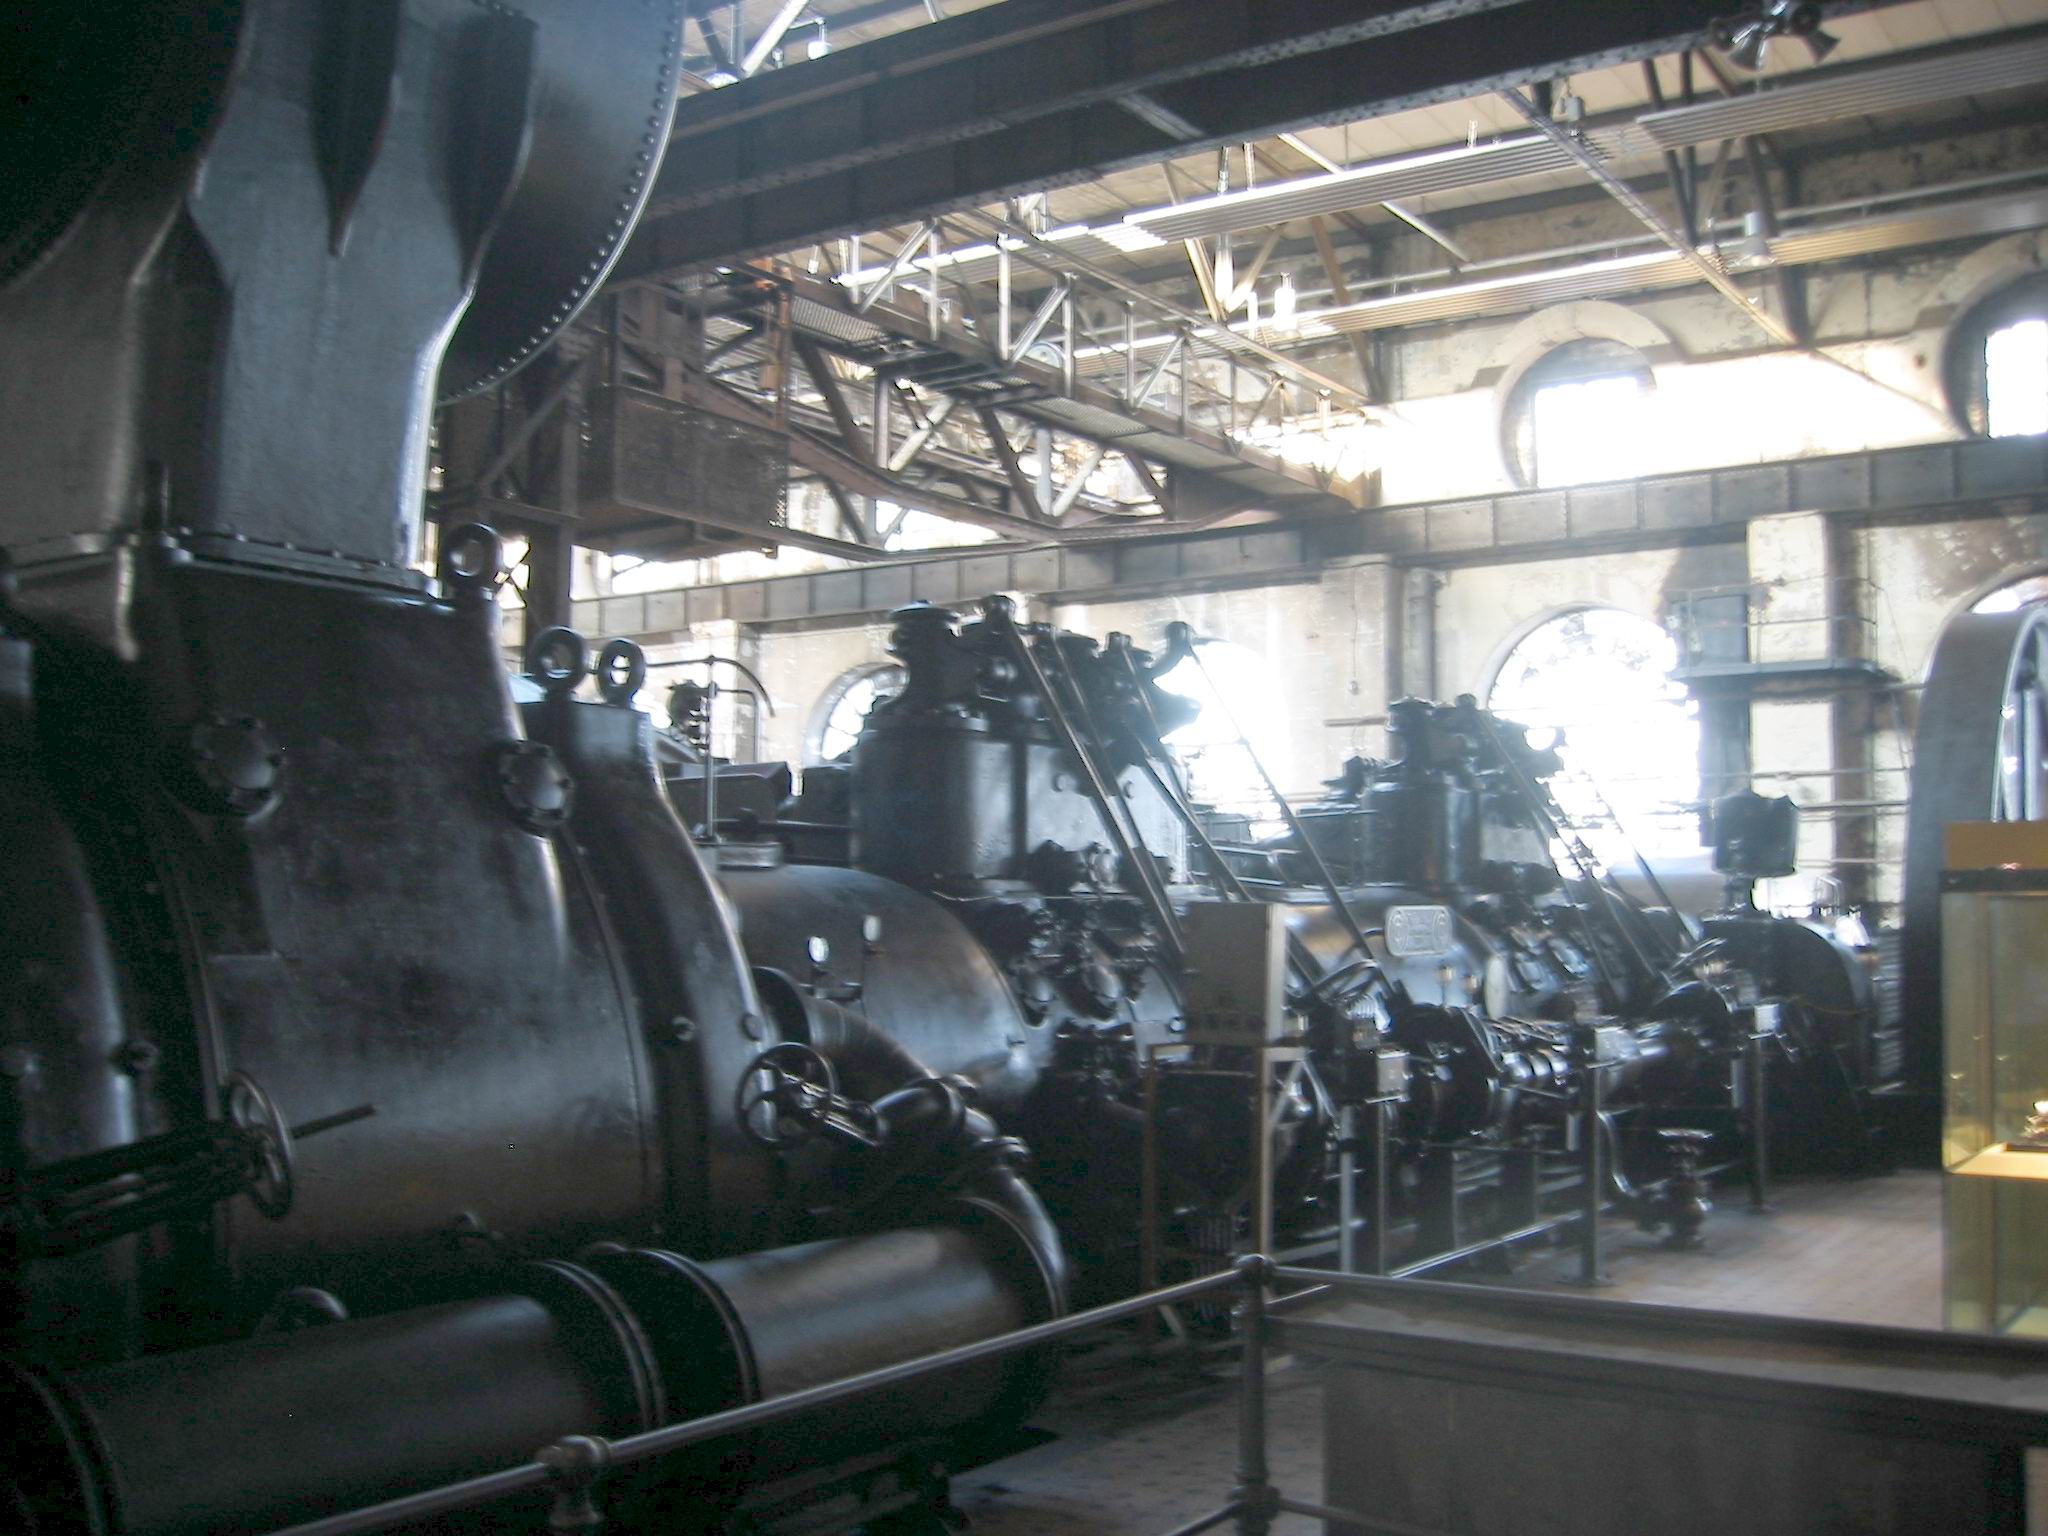 Another view of the machinery in the Vlklingen Ironworks.